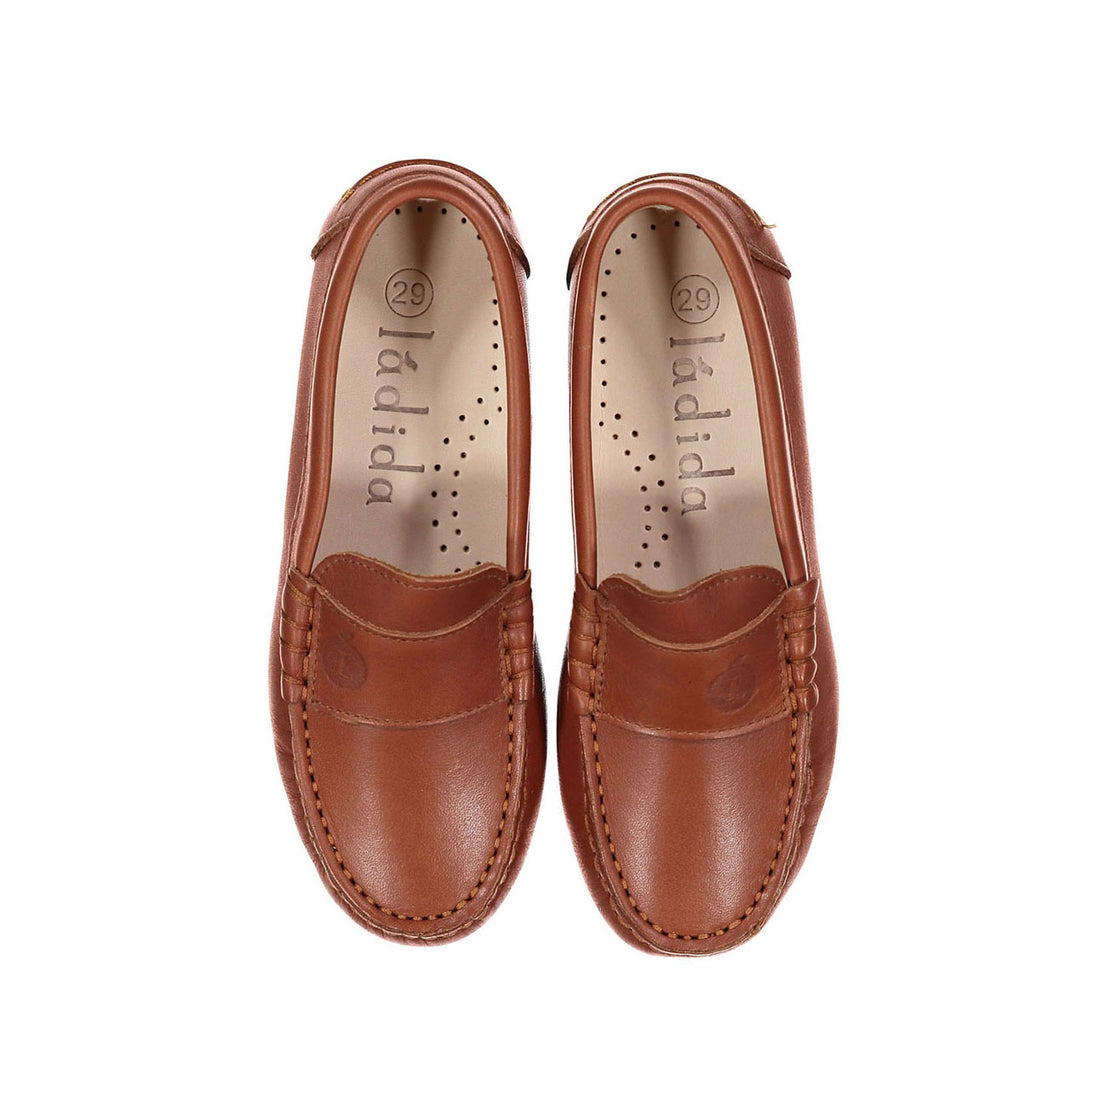 Ladida Luggage Brown Leather Loafer